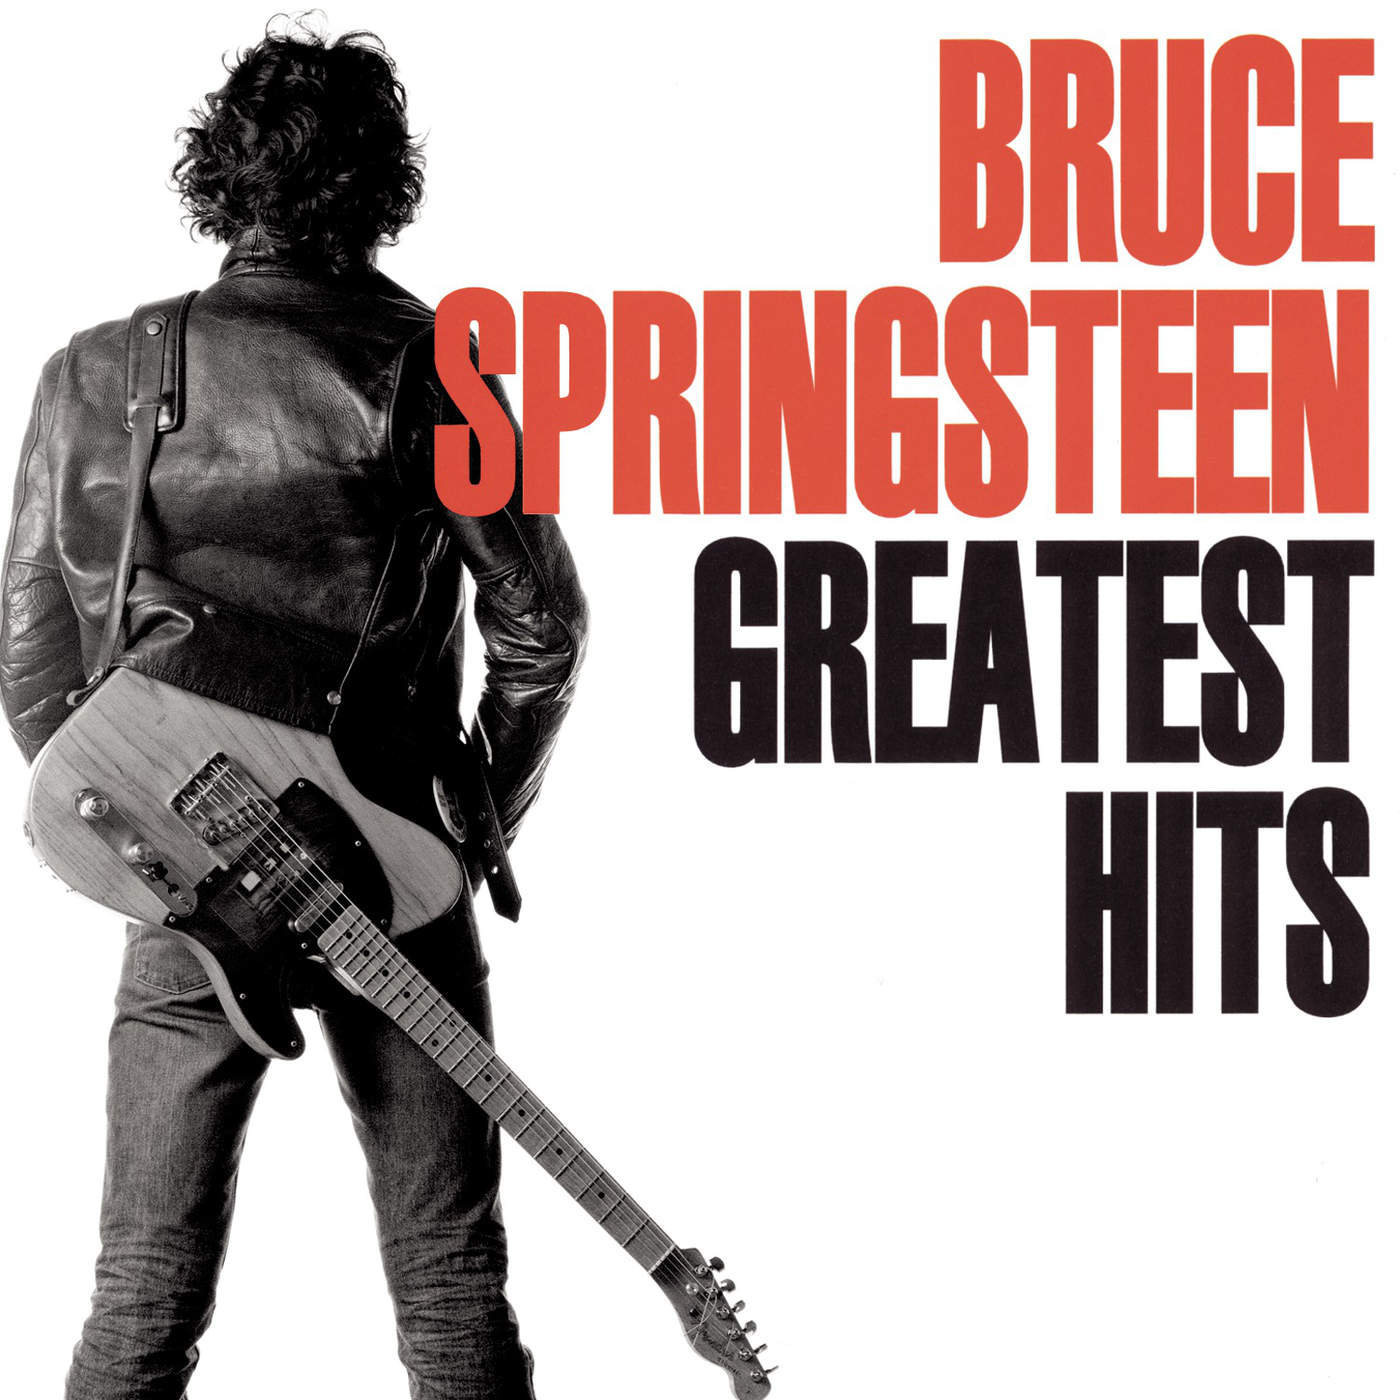 Art for Hungry Heart by Bruce Springsteen